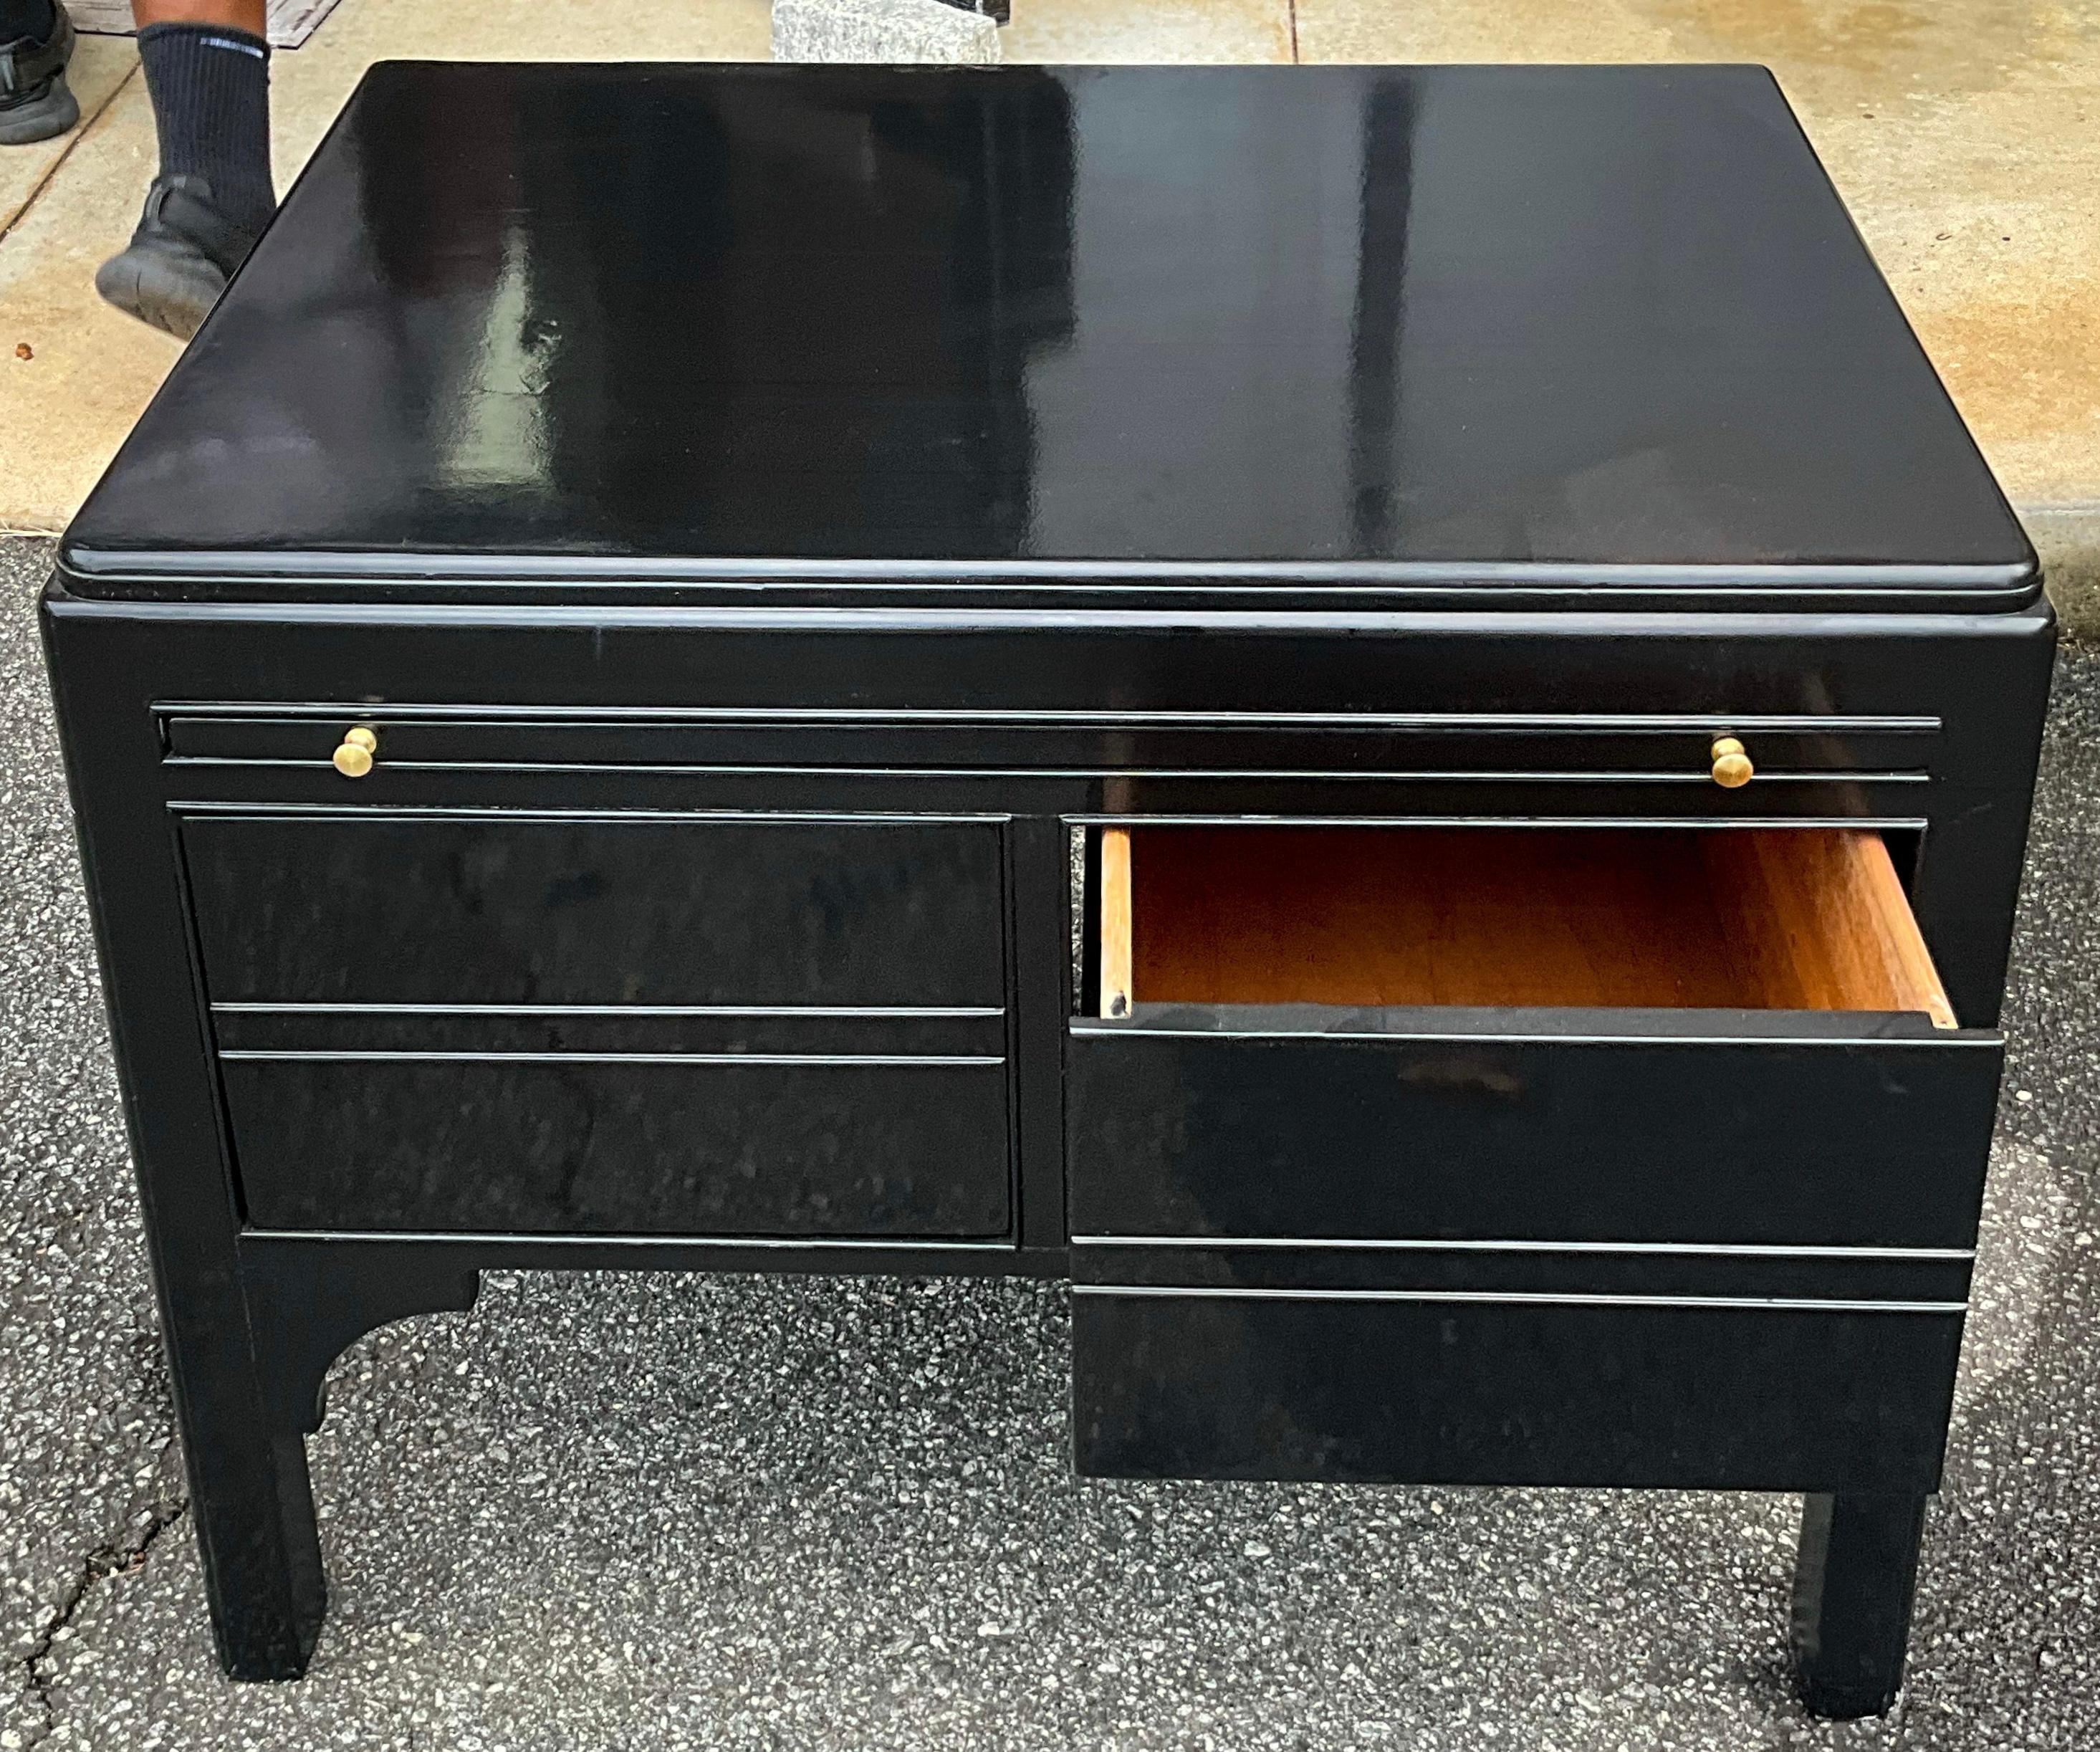 American Mid-Century Asian Modern Low Profile Black Lacquer Side Tables / Chests -Pair For Sale